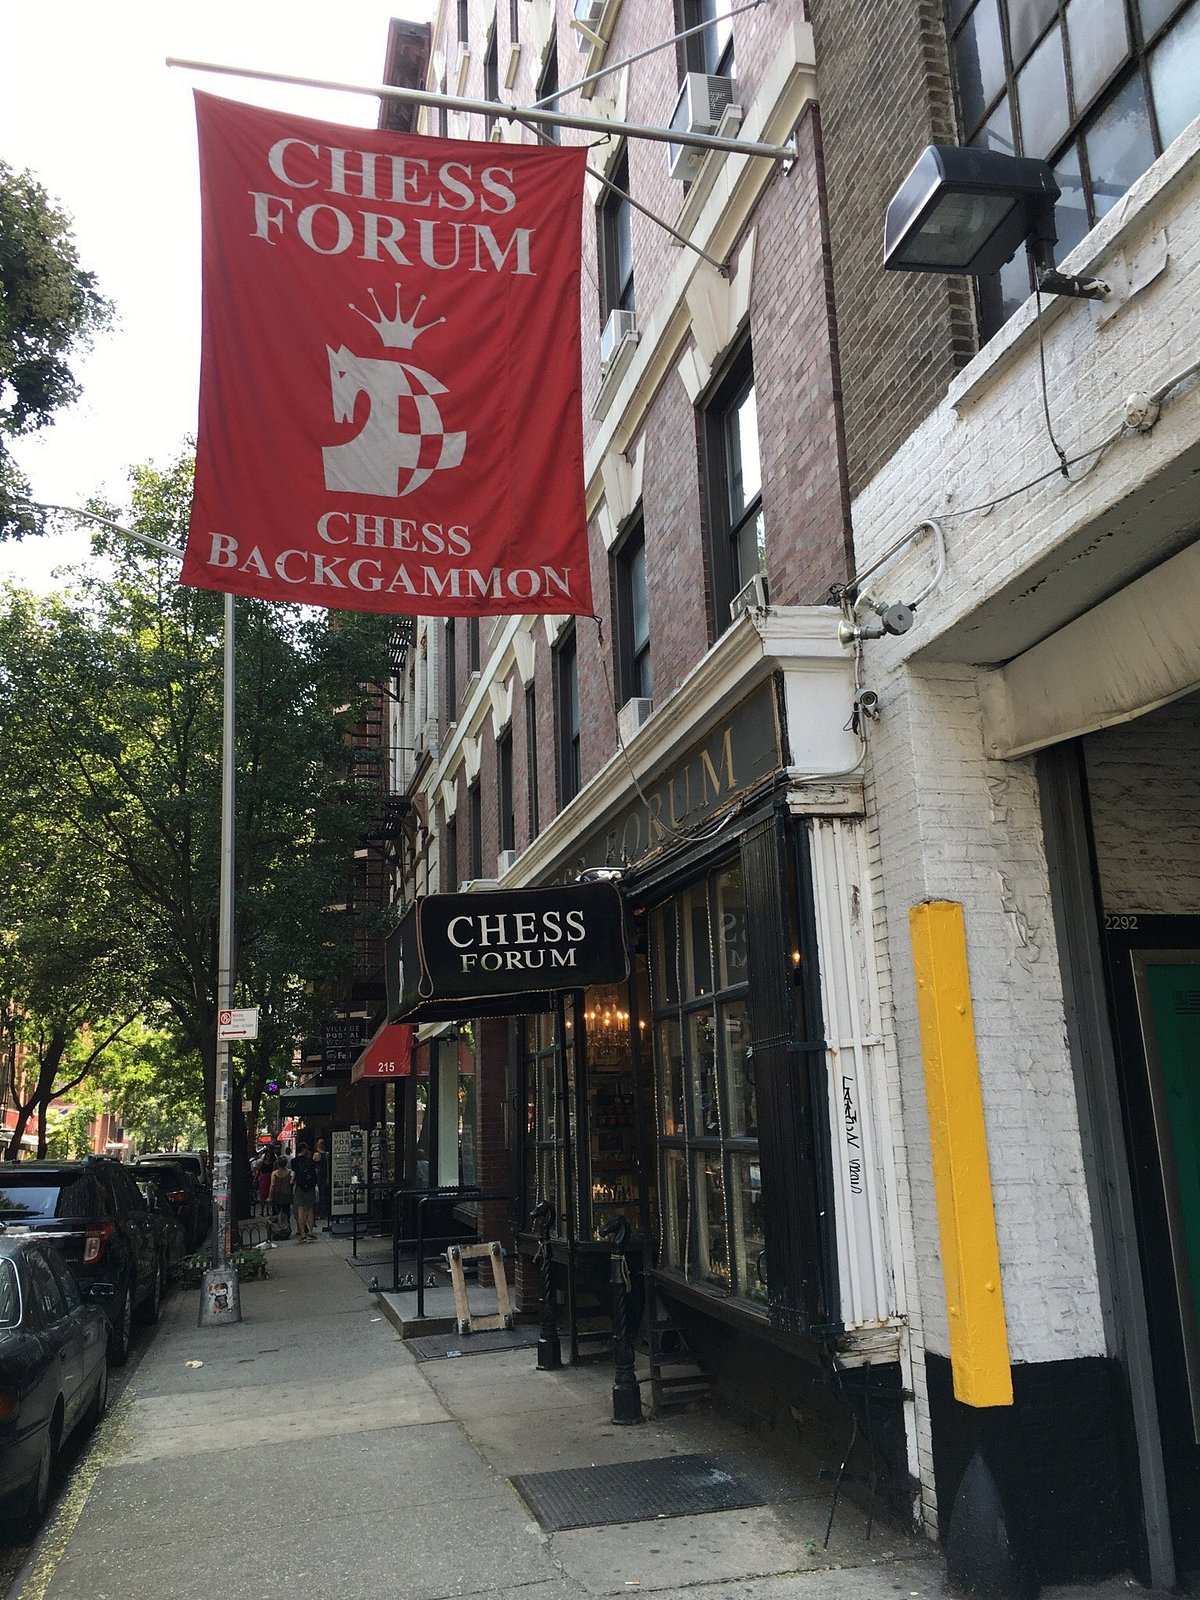 Chess Forum - All You Need to Know BEFORE You Go (with Photos)